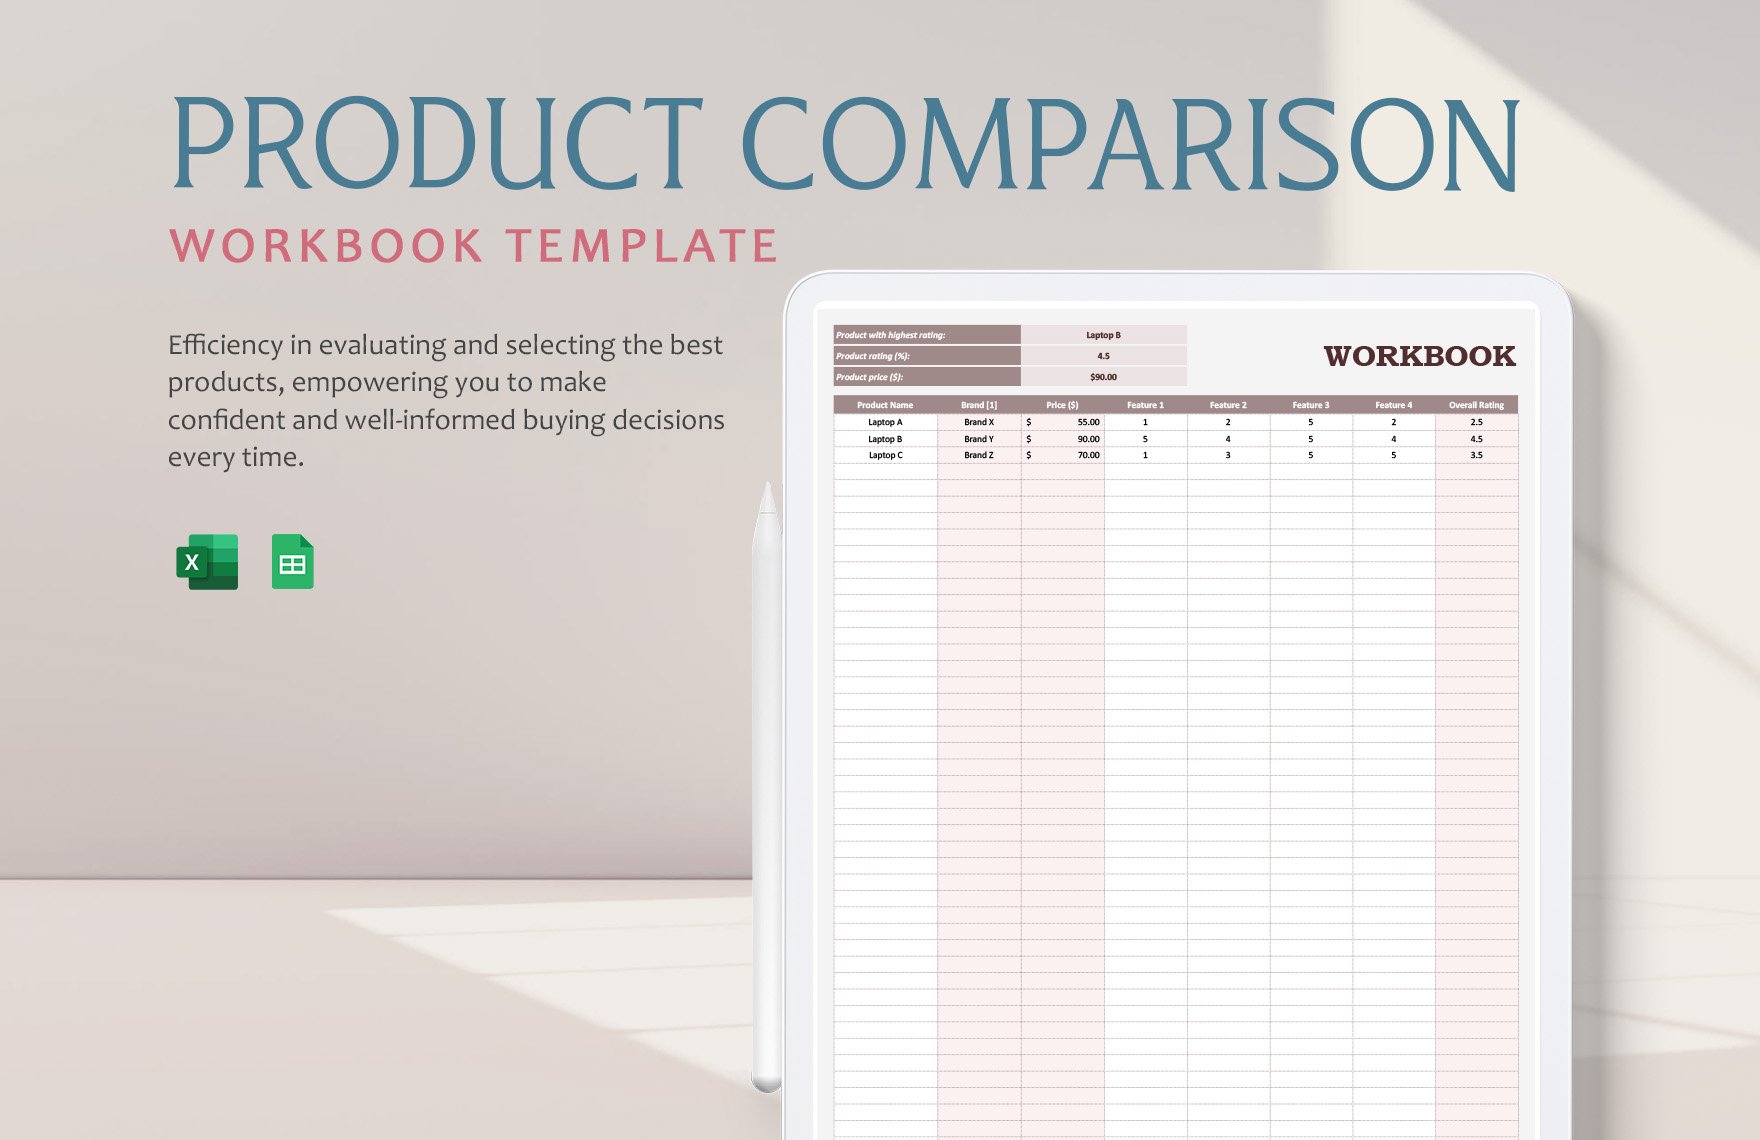 Product Comparison Workbook Template in Excel, Google Sheets